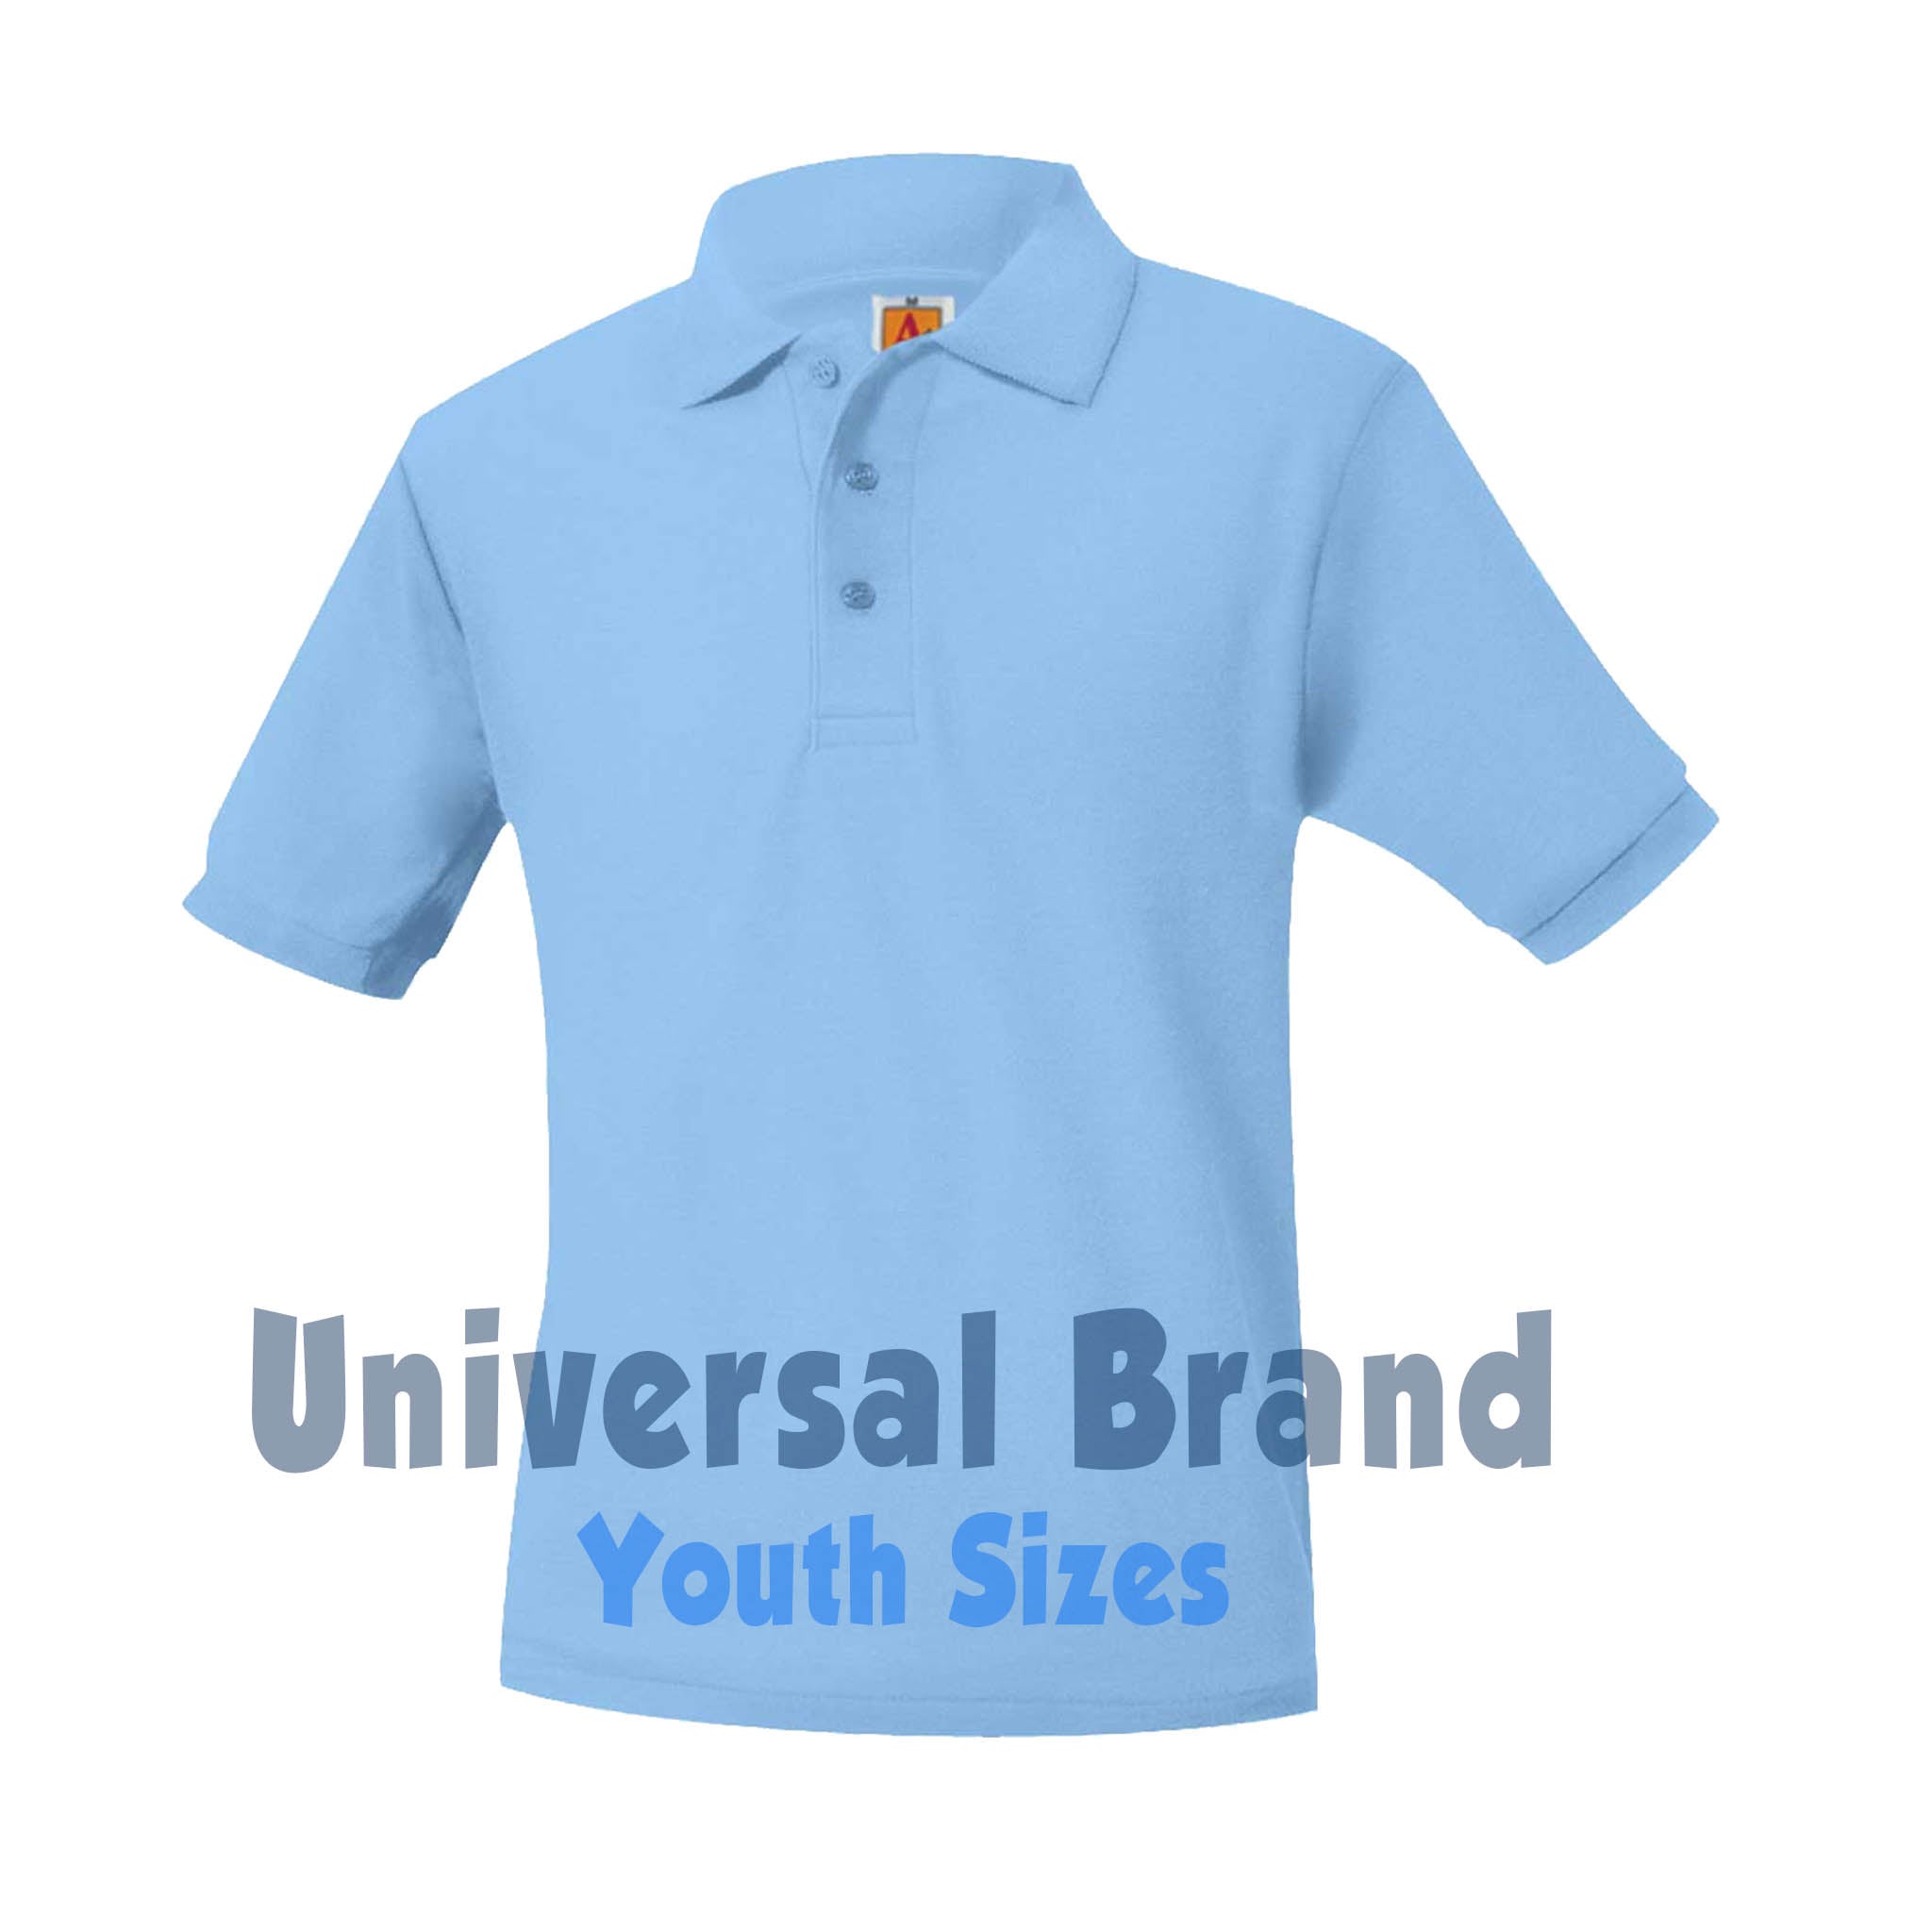 Universal S/S Youth Unisex Polo